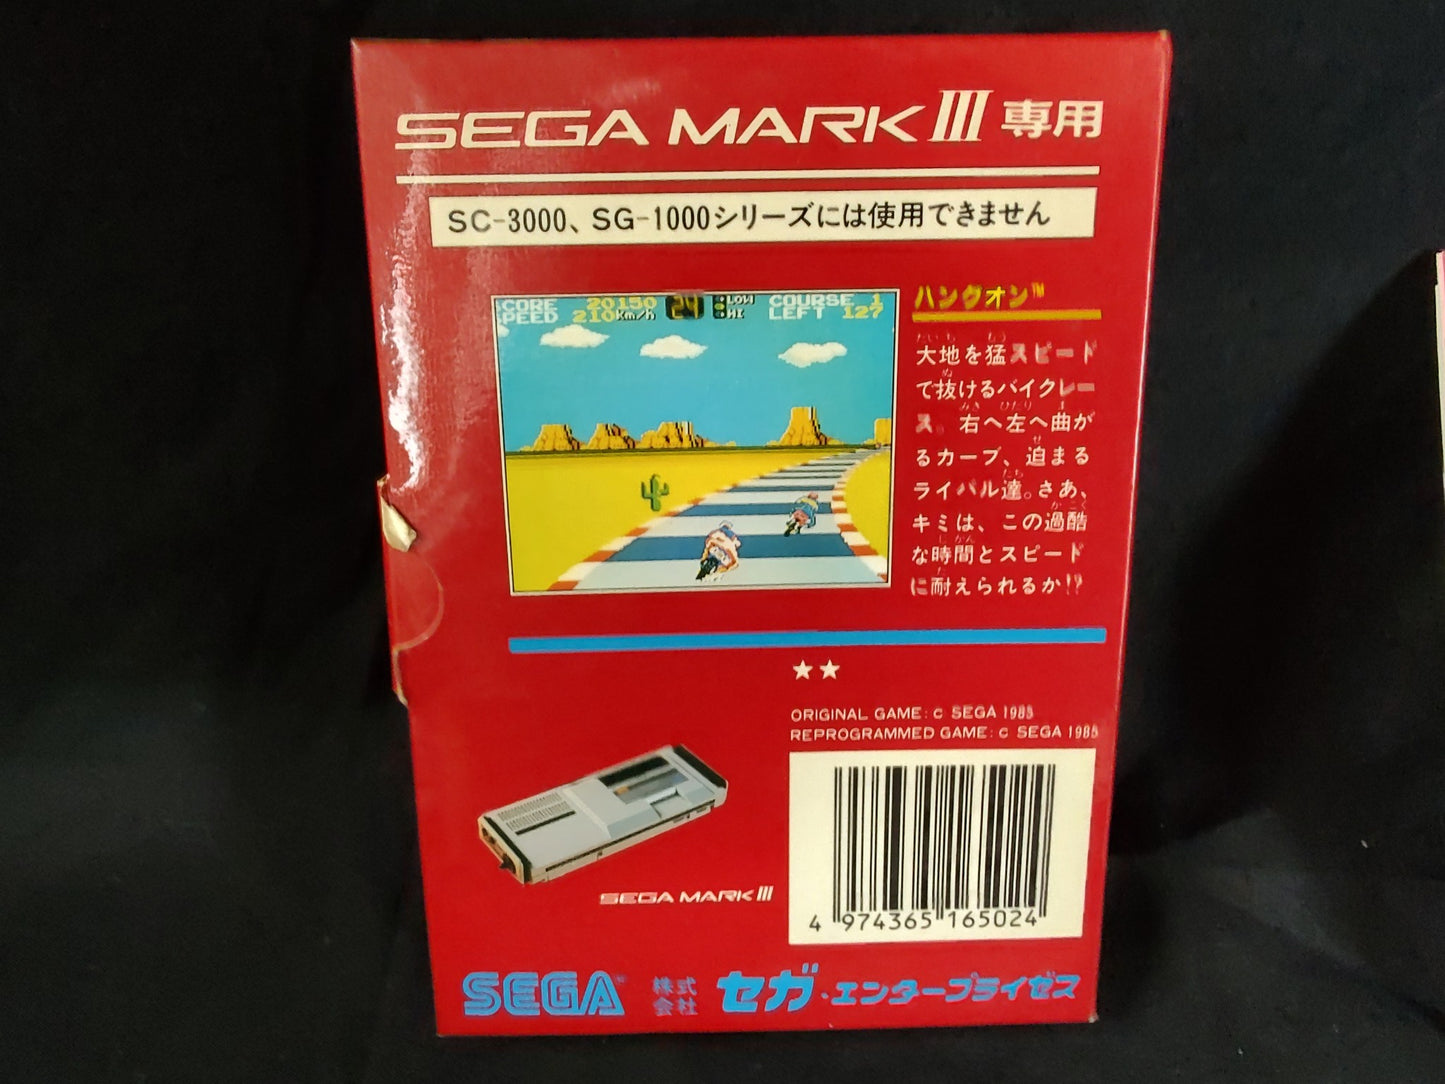 HANG ON My card SEGA Master system /Mark3 w/Manual and Box, Working-f1221-